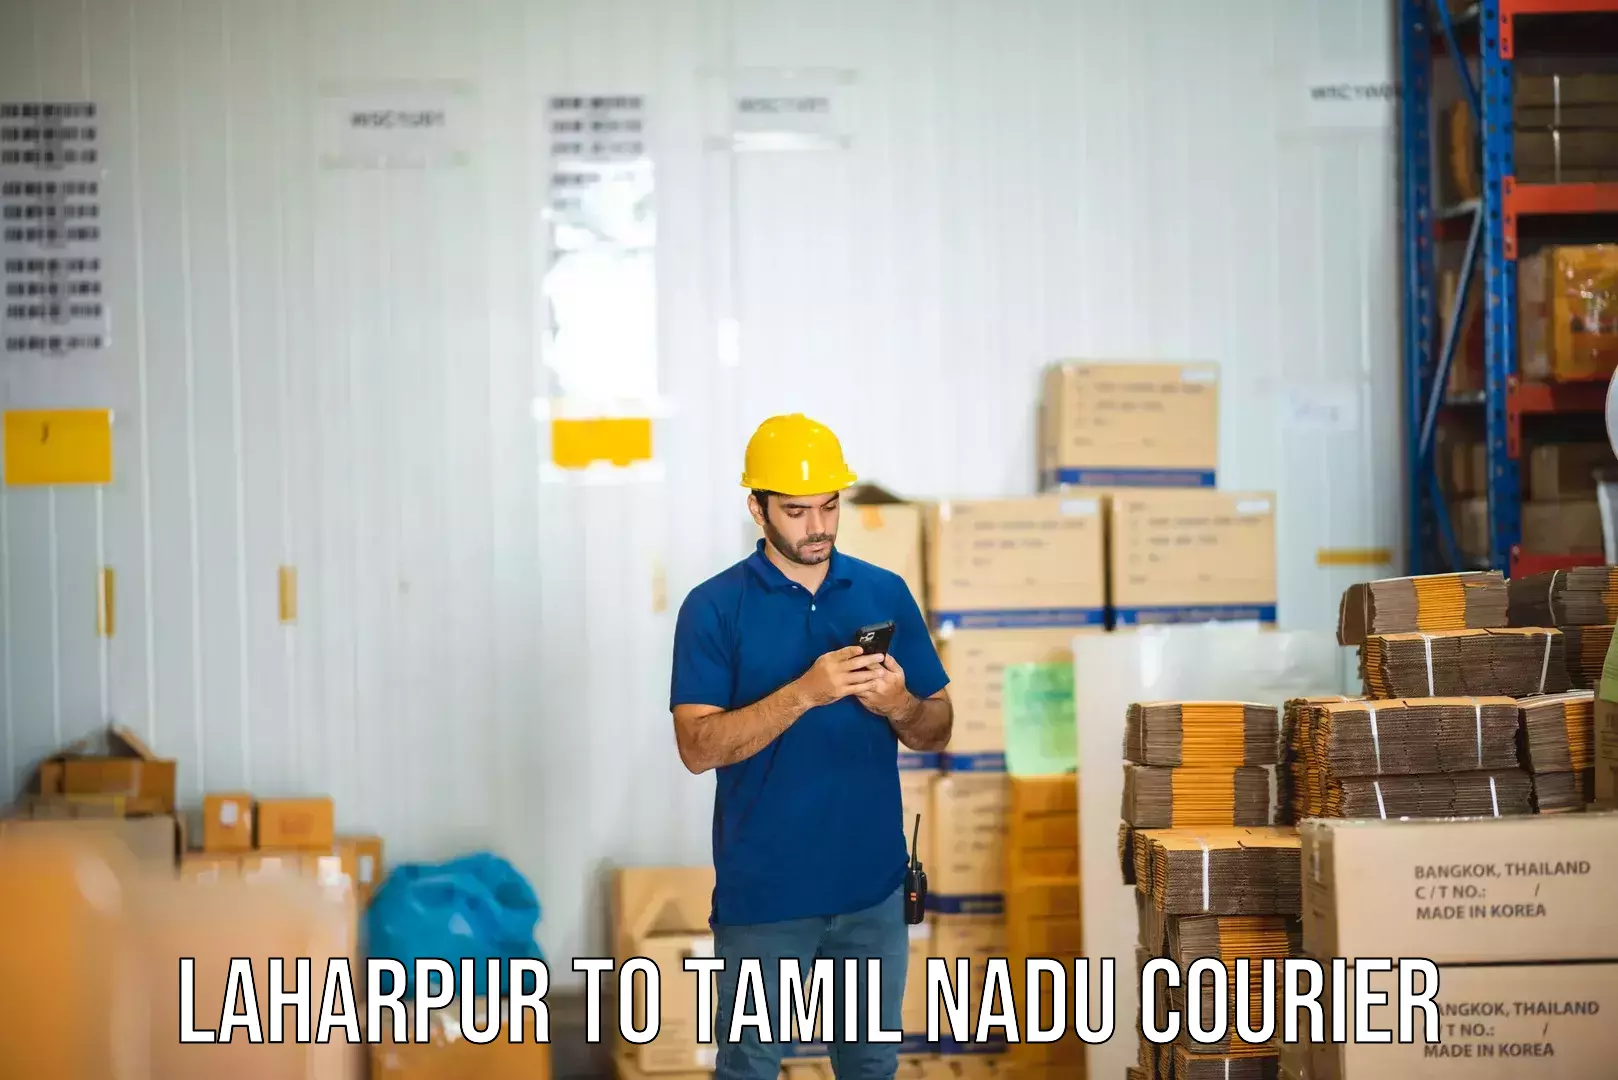 Small business couriers Laharpur to Thirukoilure